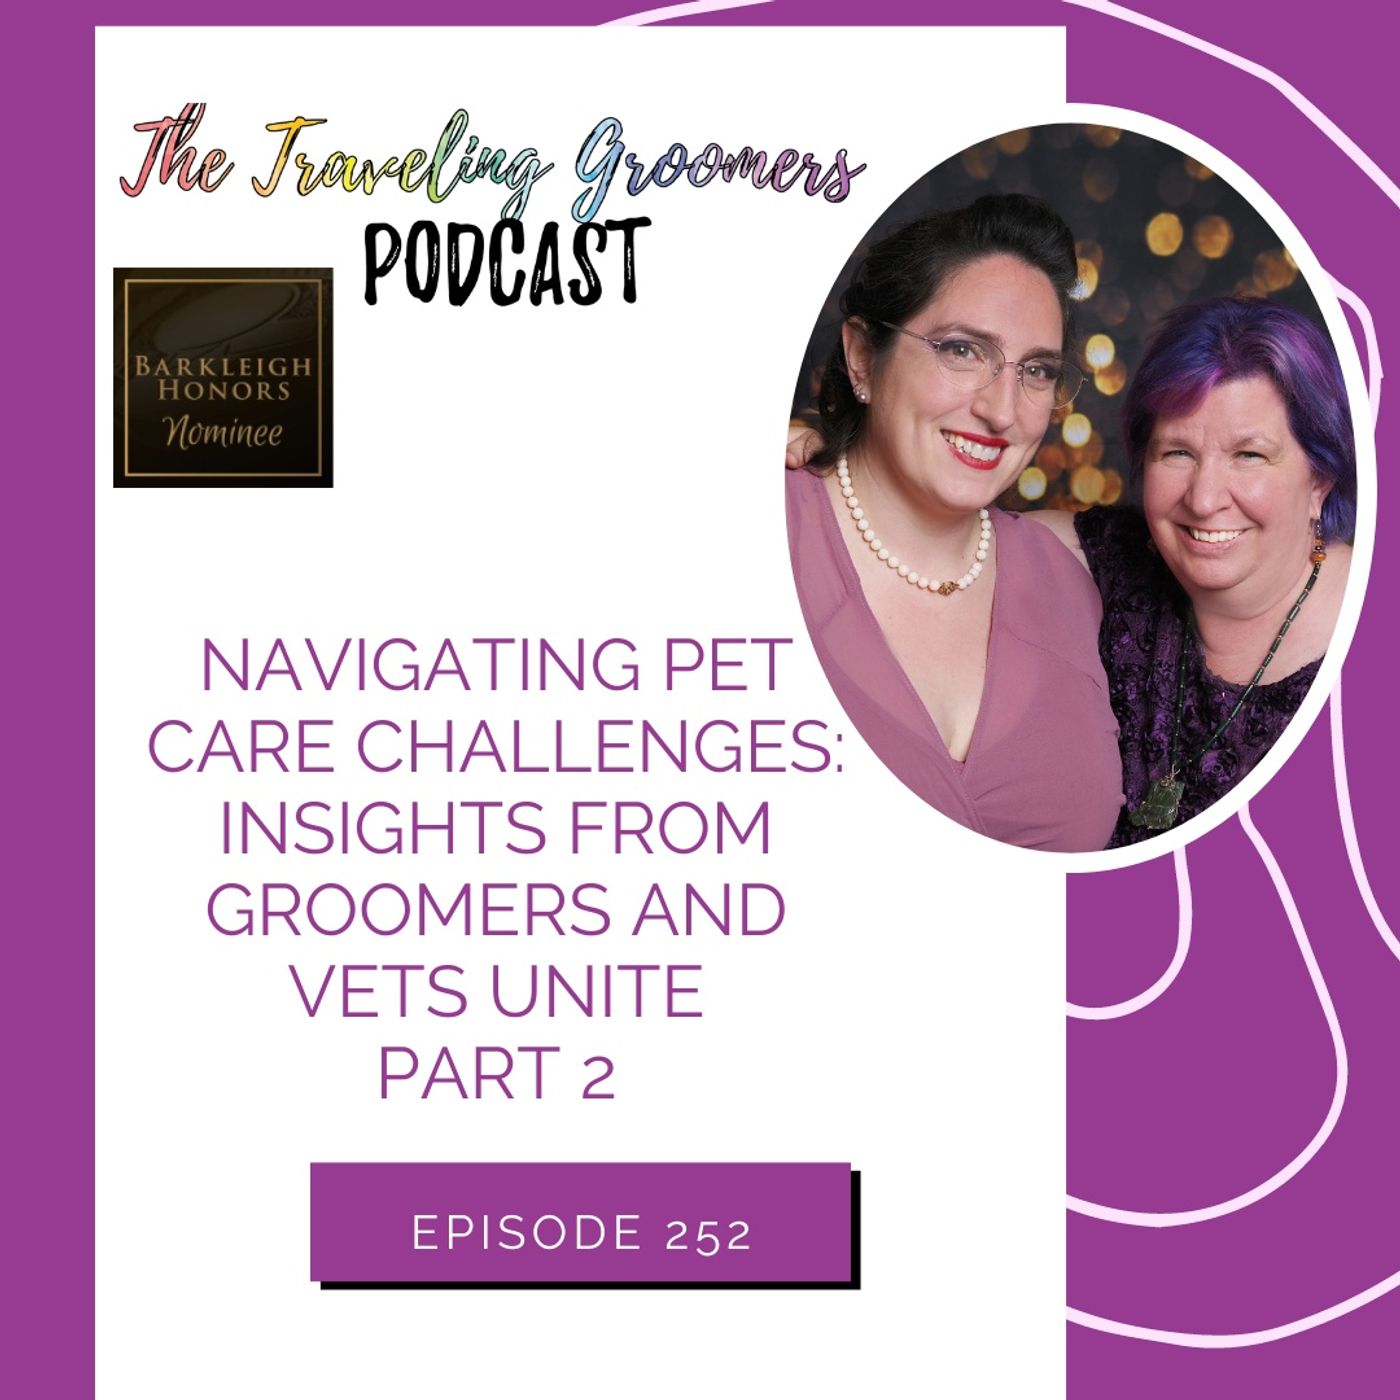 Navigating Pet Care Challenges Insights from Groomers and Vets Unite Part 2